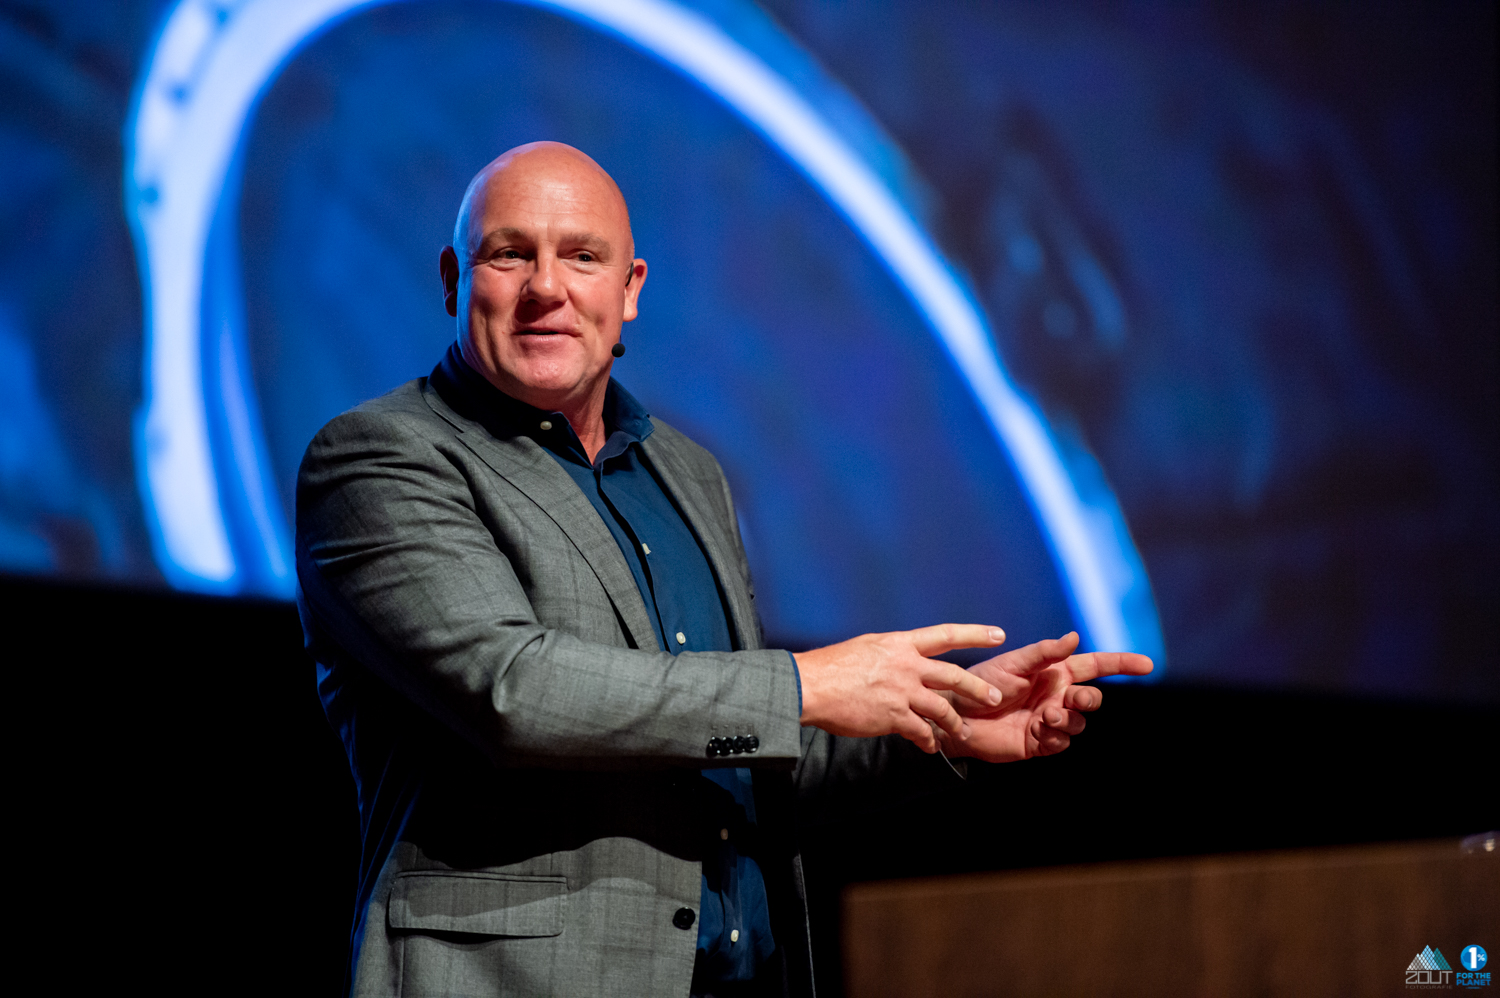 Andre kuipers